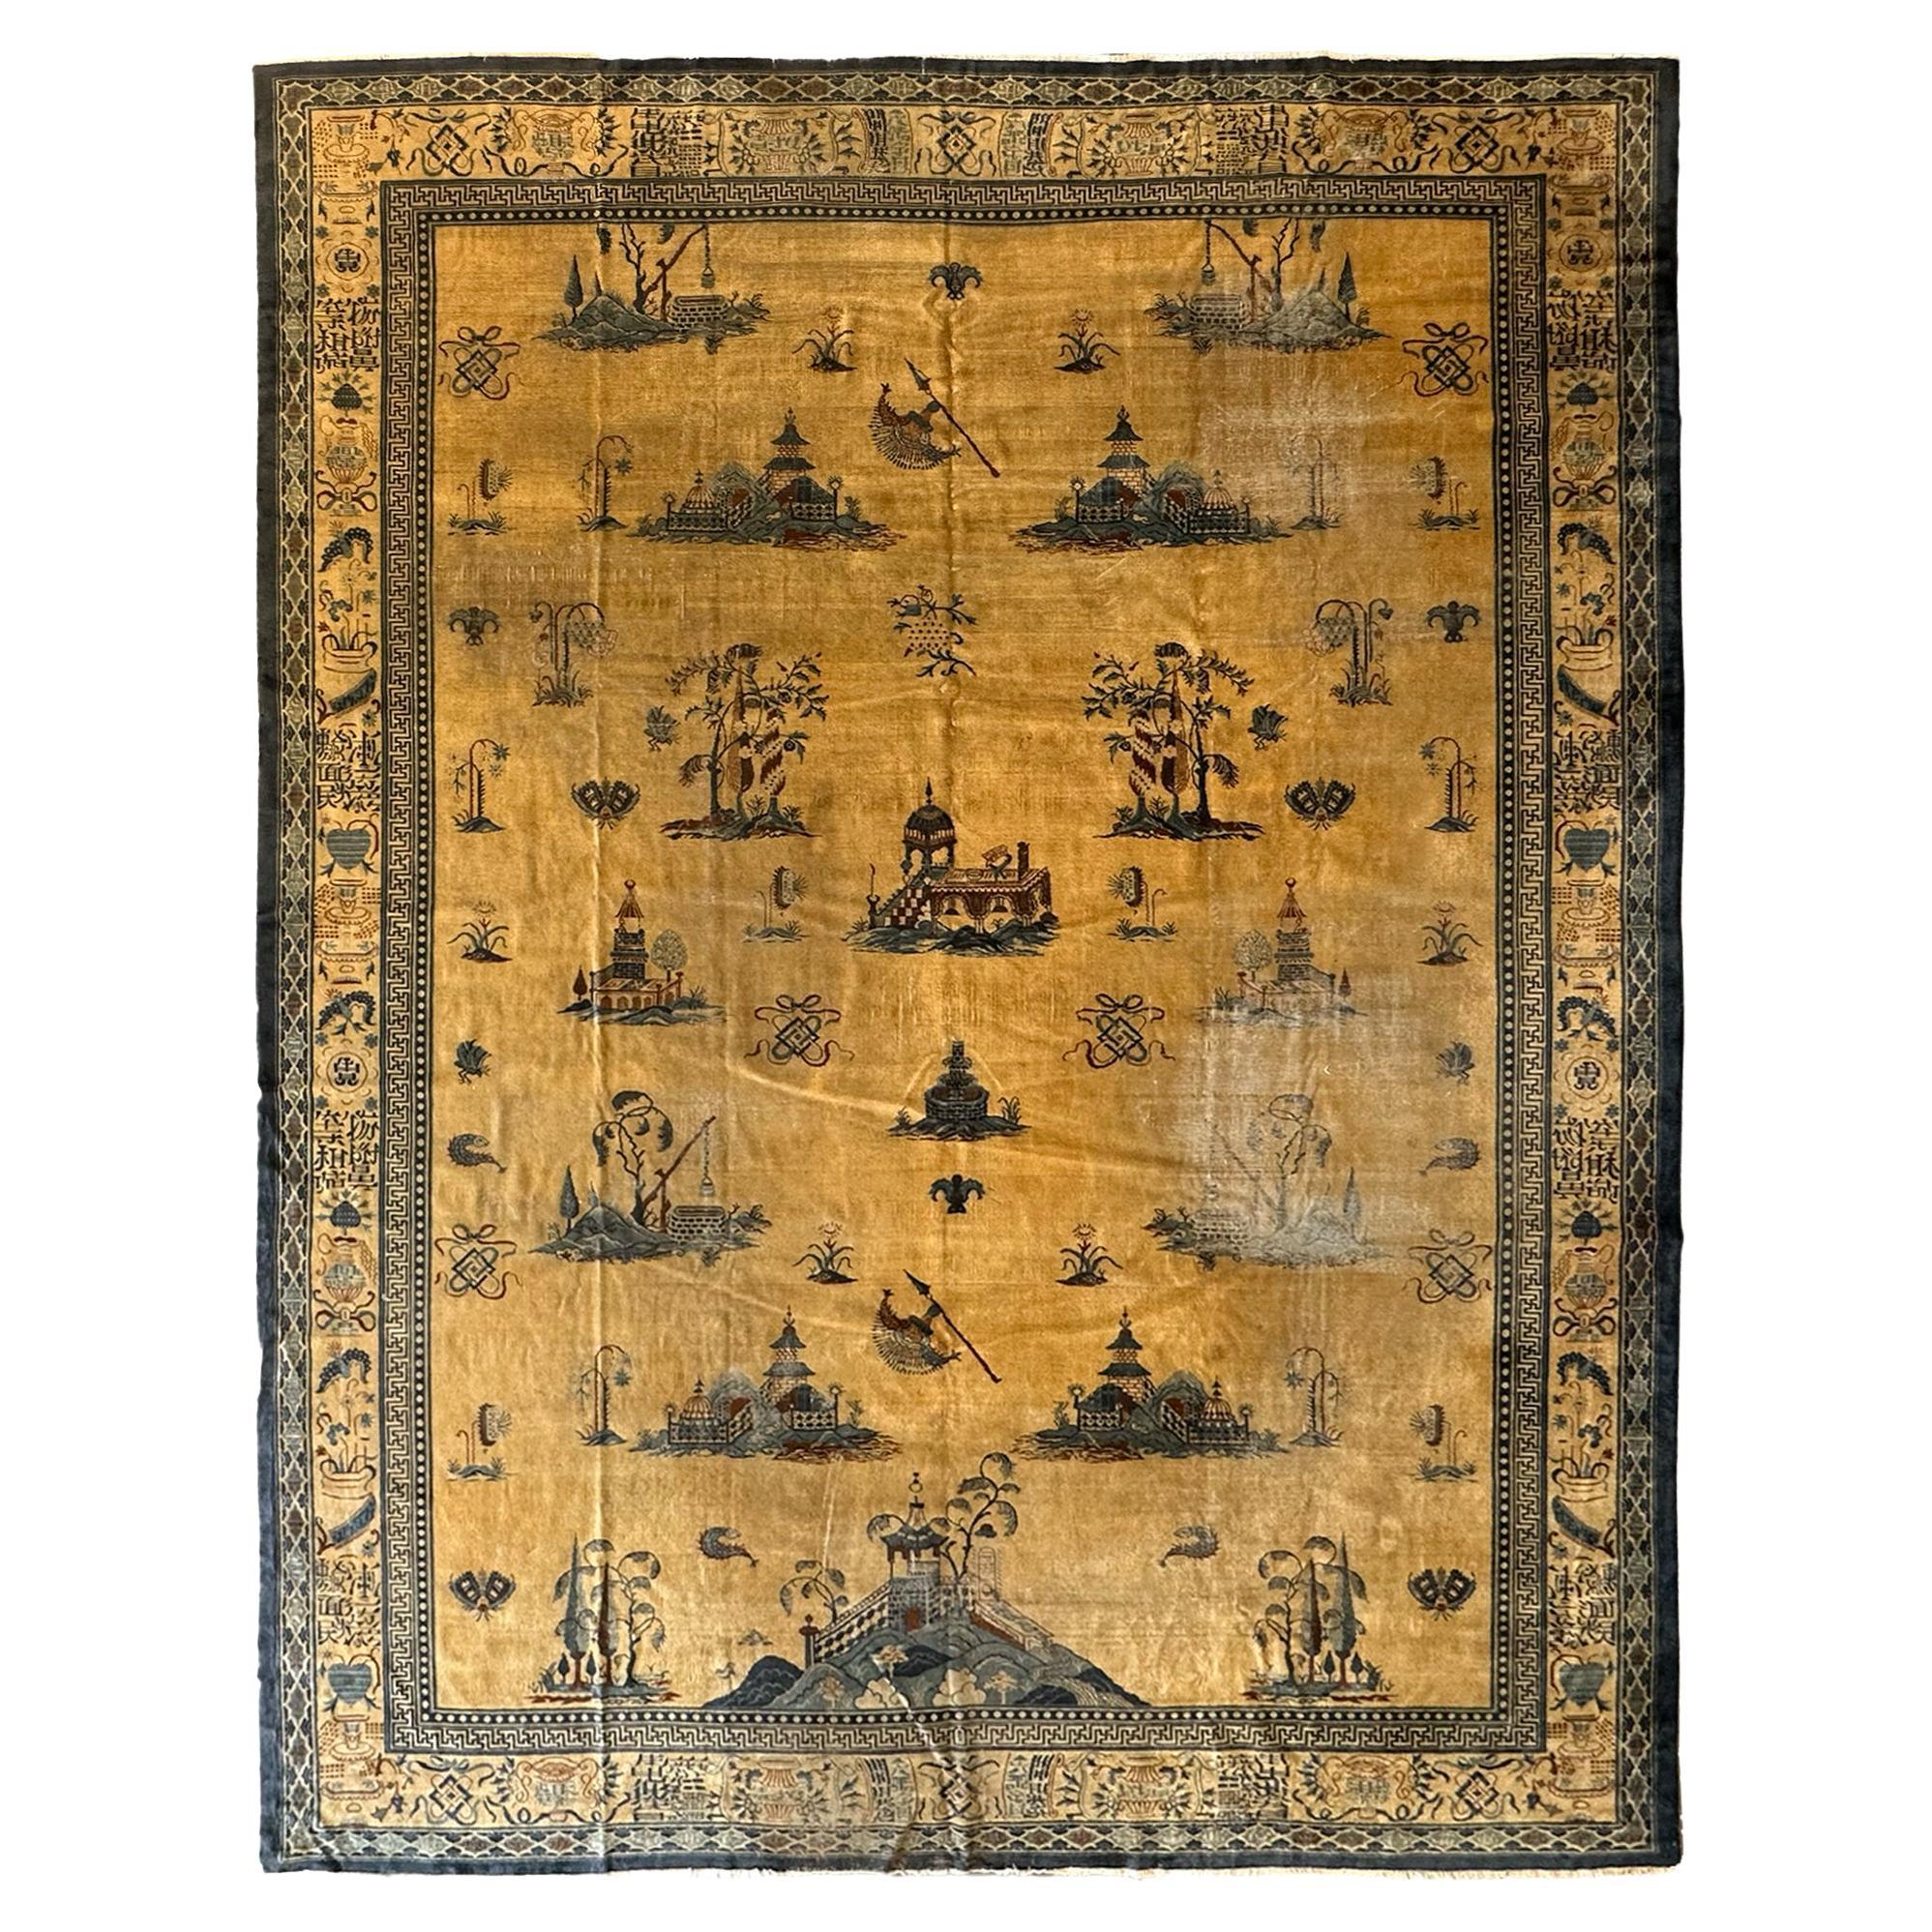 Rare Antique Chinese Rug Pre-1900 Chinese Symbols 12x15 361cm x 427cm Pre-1900 For Sale